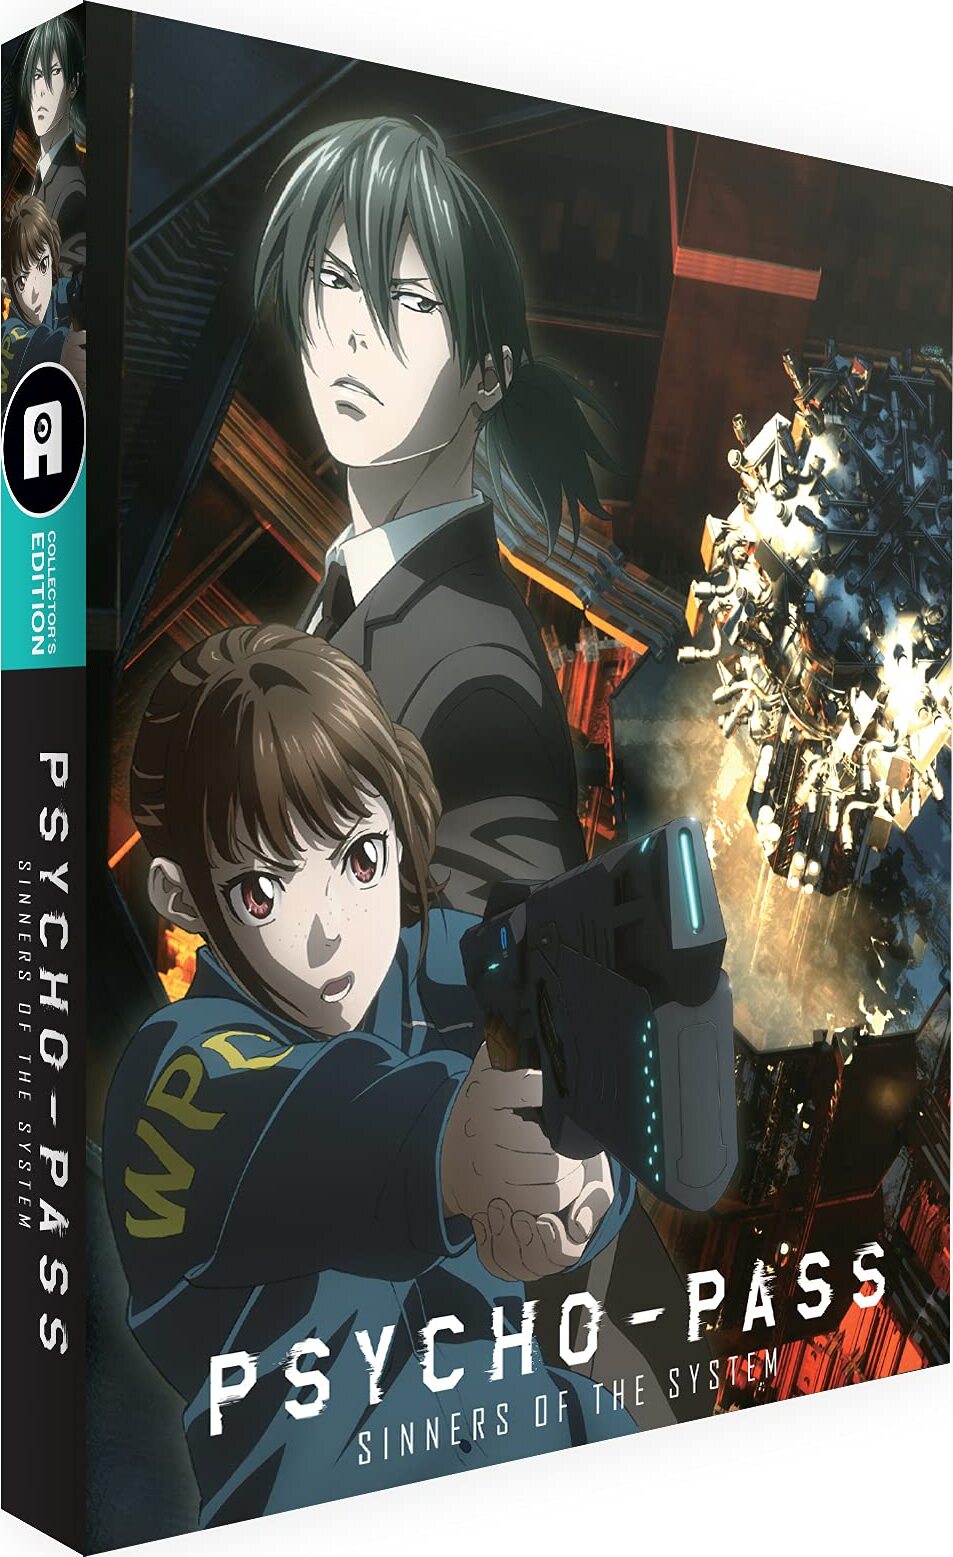 Psycho-Pass: Sinners of the System Blu-ray (Limited Edition